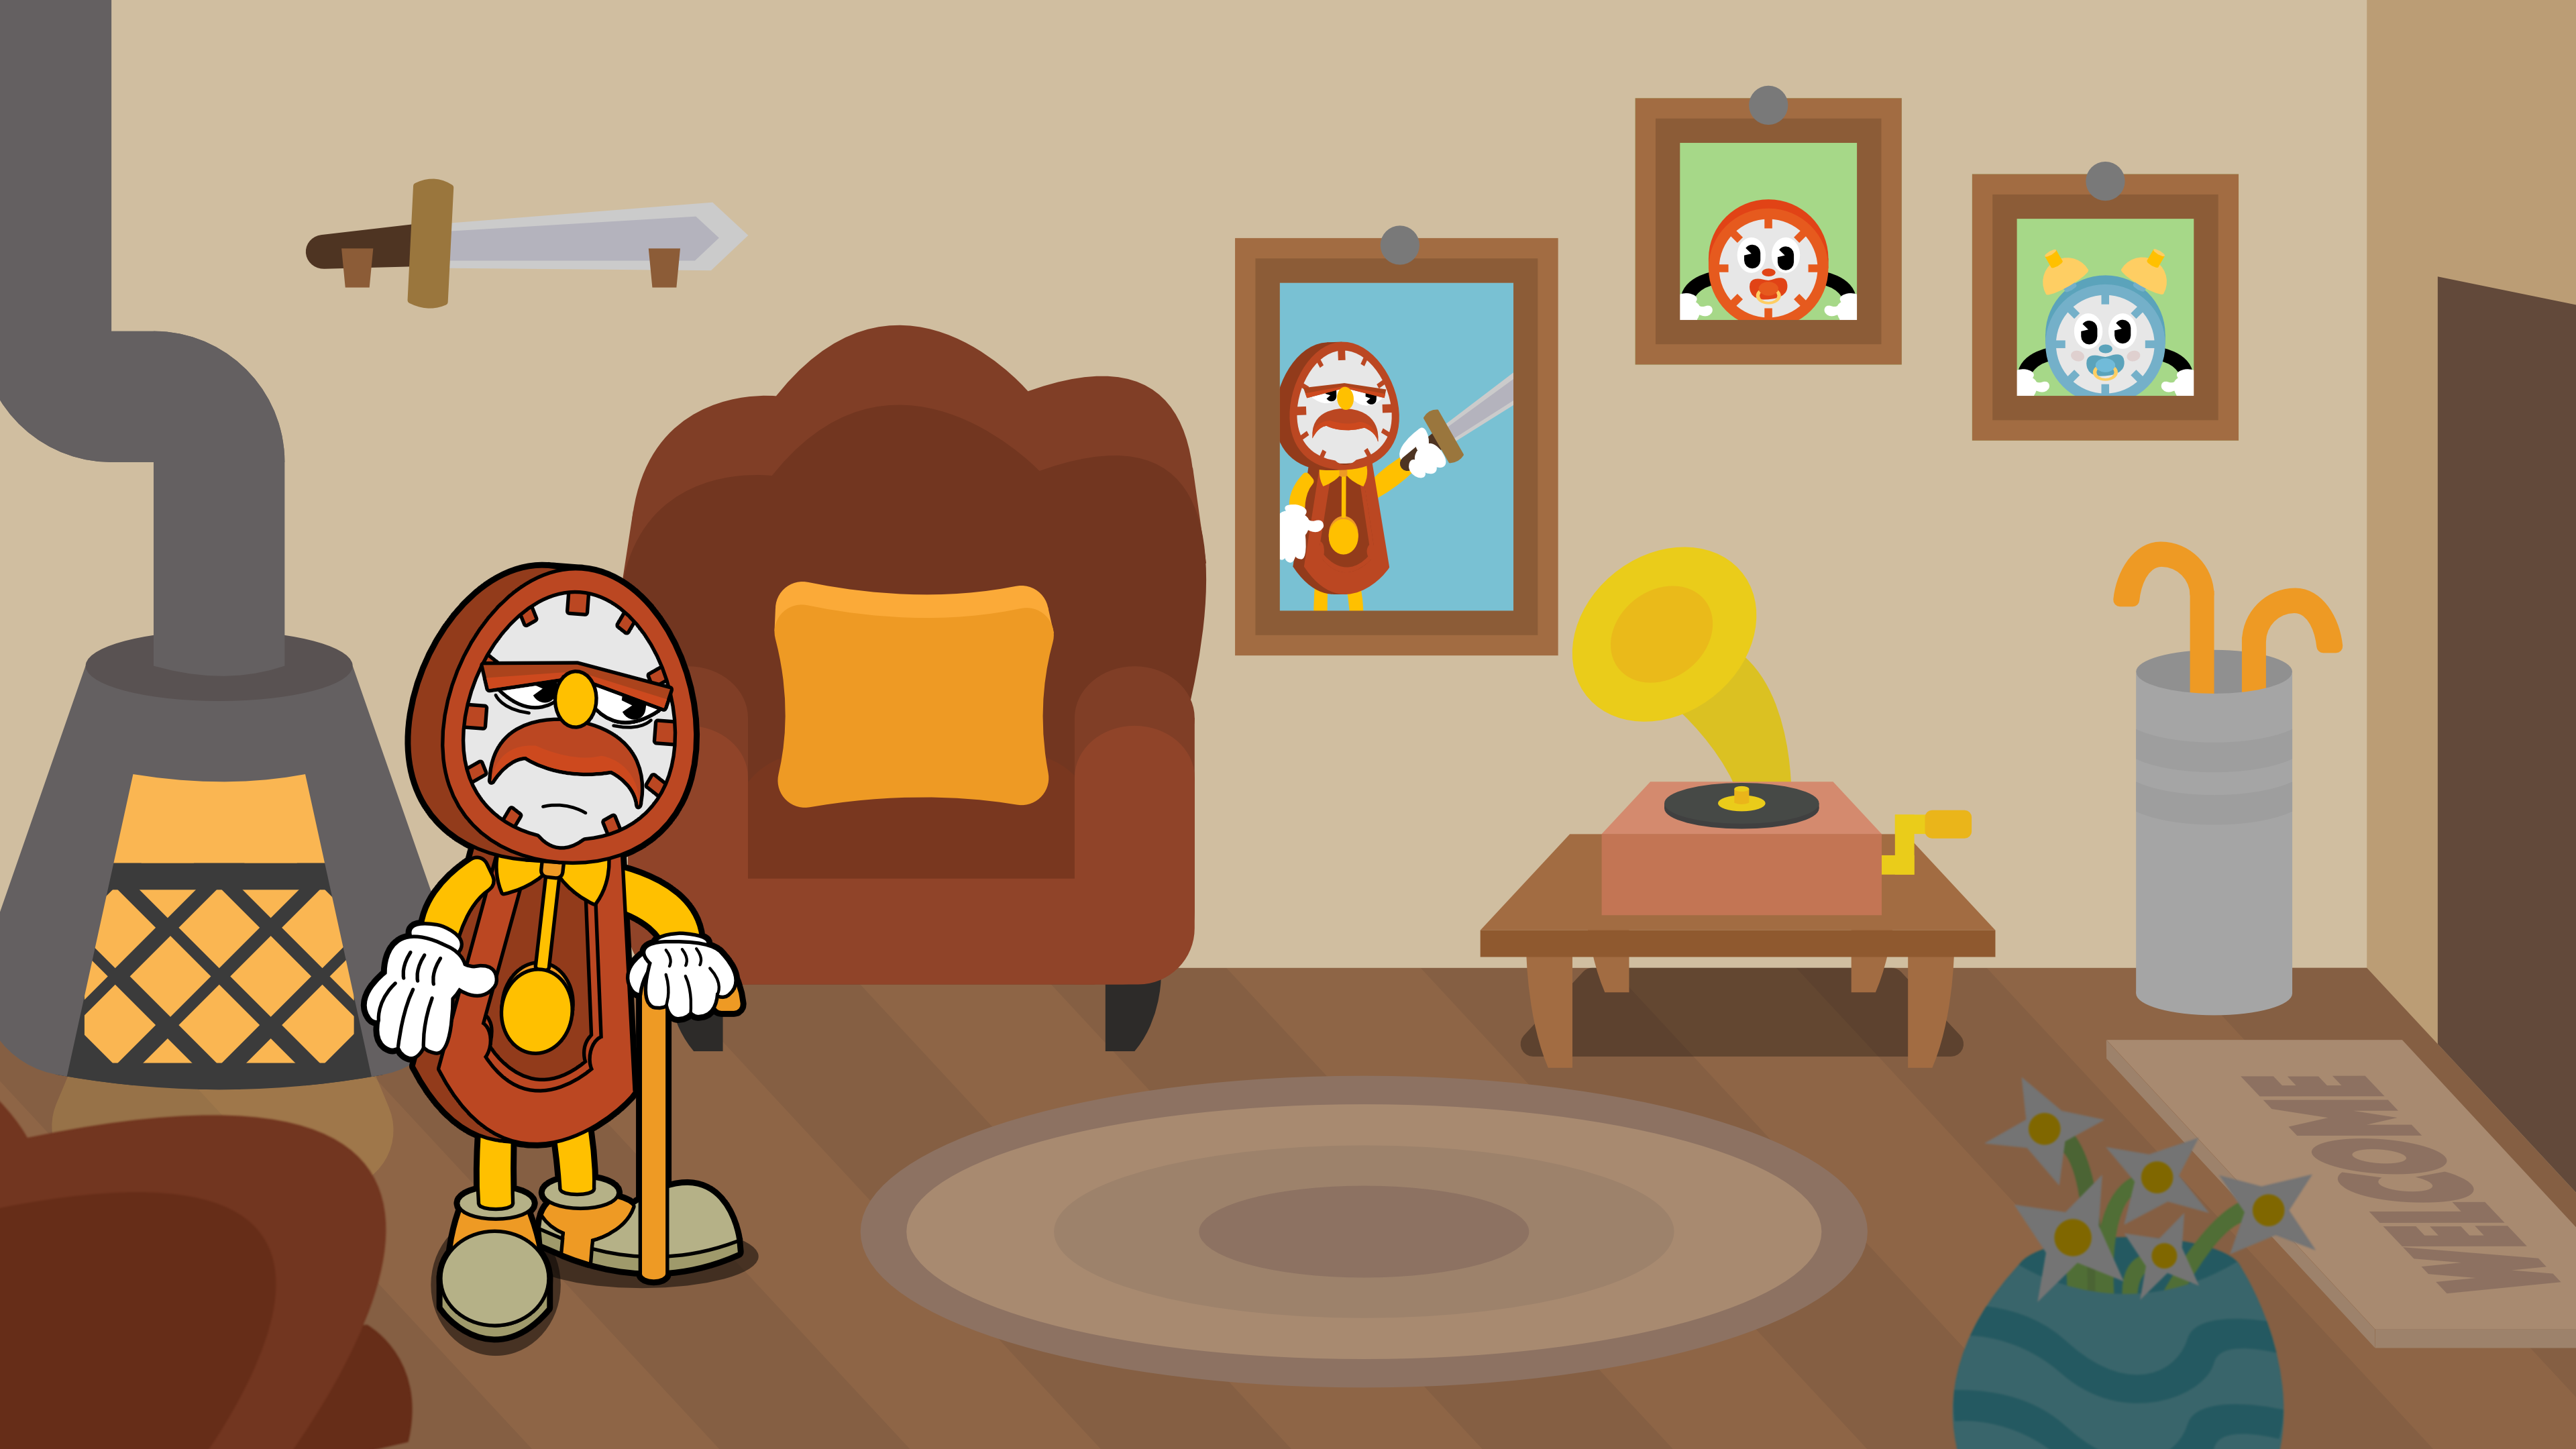 Game scene showing an old-fashioned living room